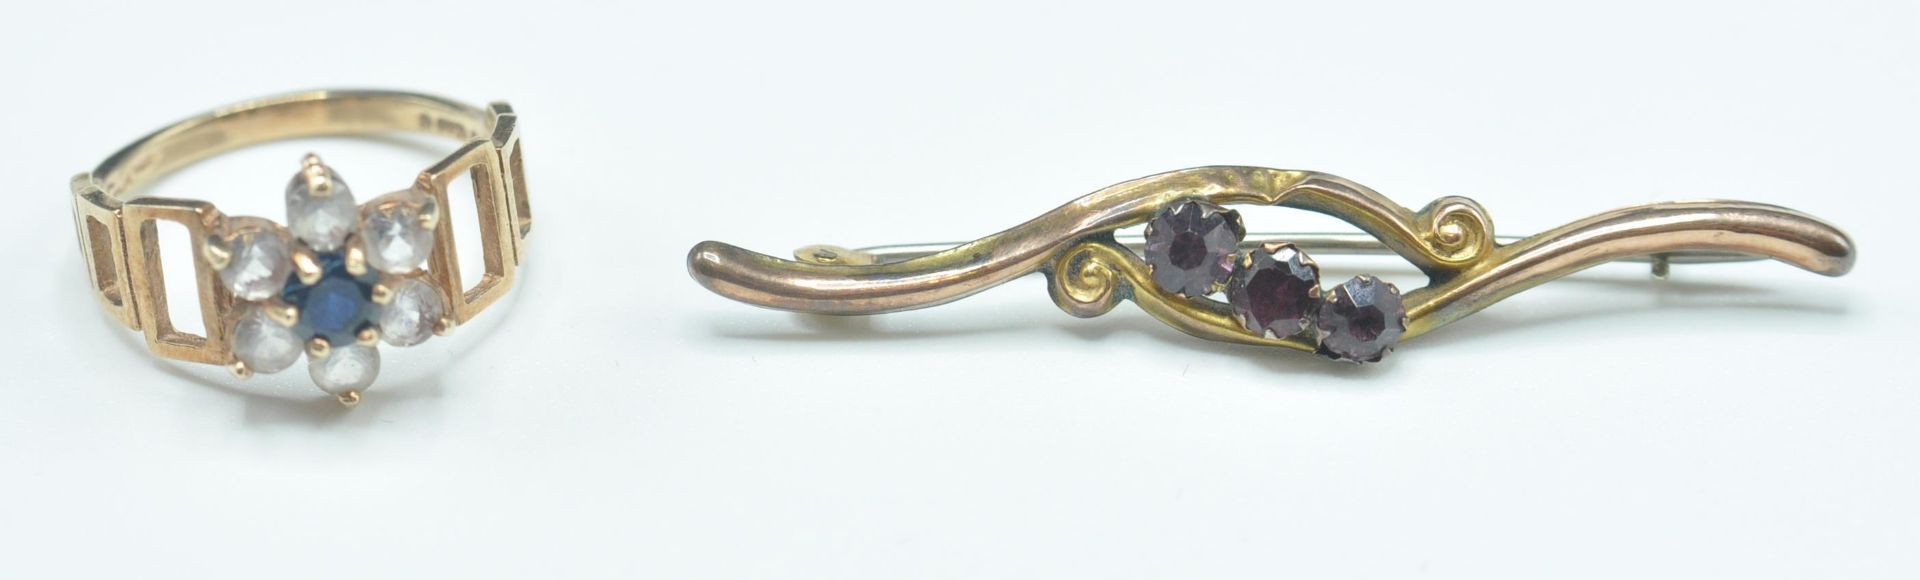 9CT GOLD AND BLUE STONE RING AND 9CT GOLD PURPLE STONE BROOCH